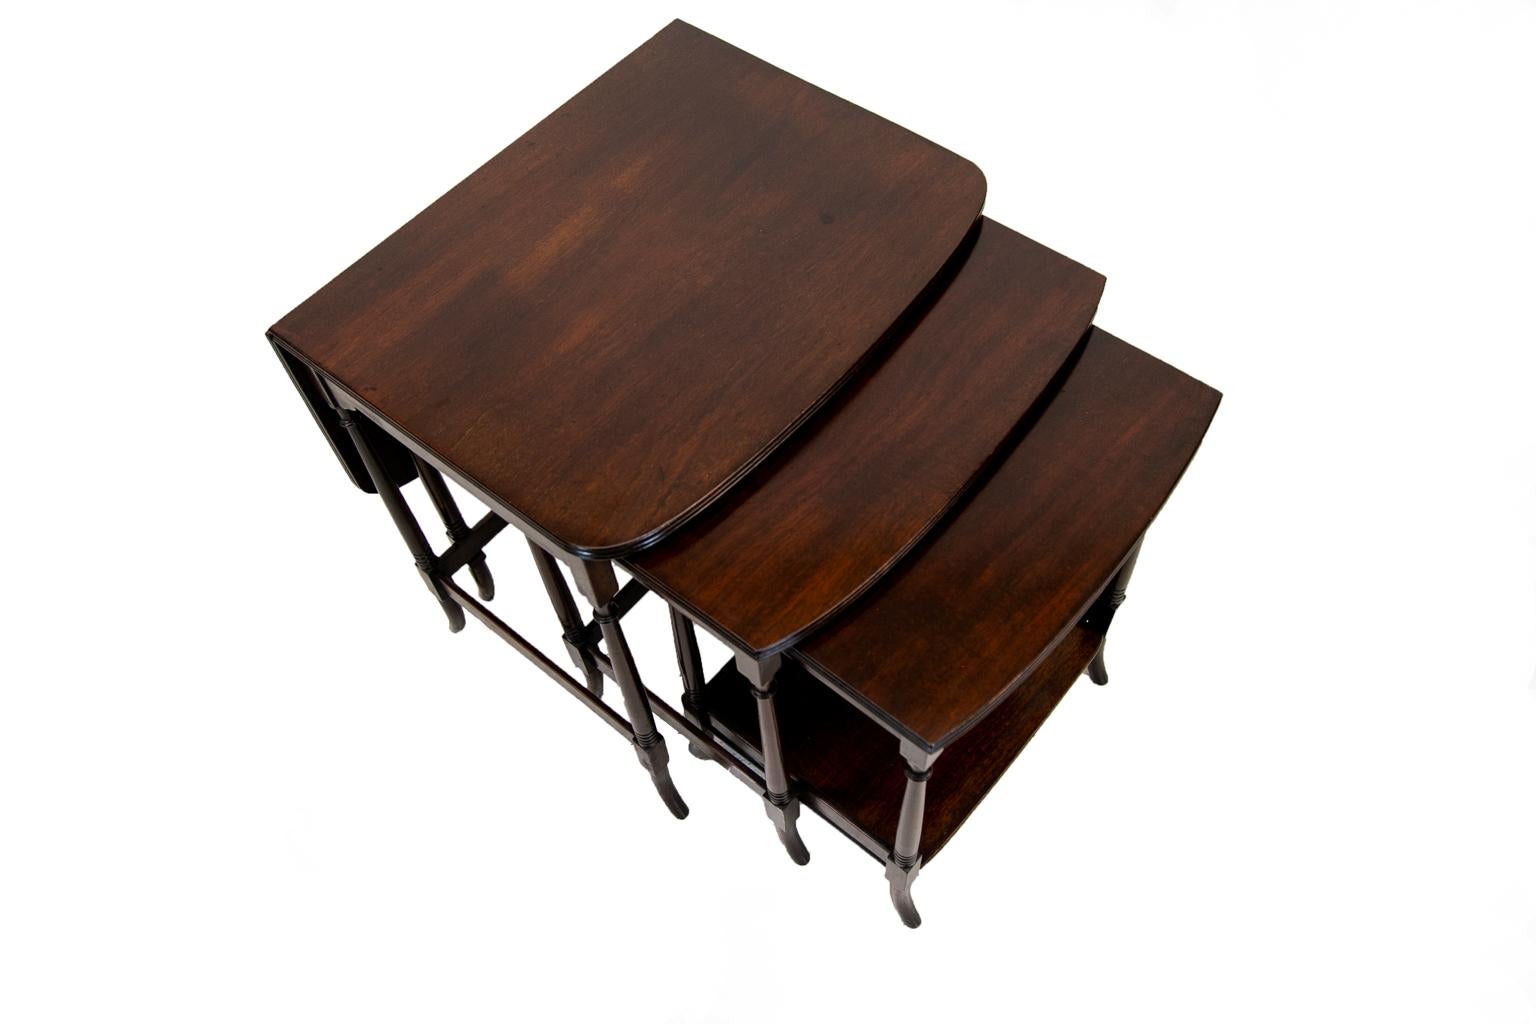 This English nest of three tables is solid mahogany. The smallest table has a shelf with a three sided gallery. All three tables have tripled reeded edges. The largest table has a rear drop leaf that can be raised if desired, and is supported by a